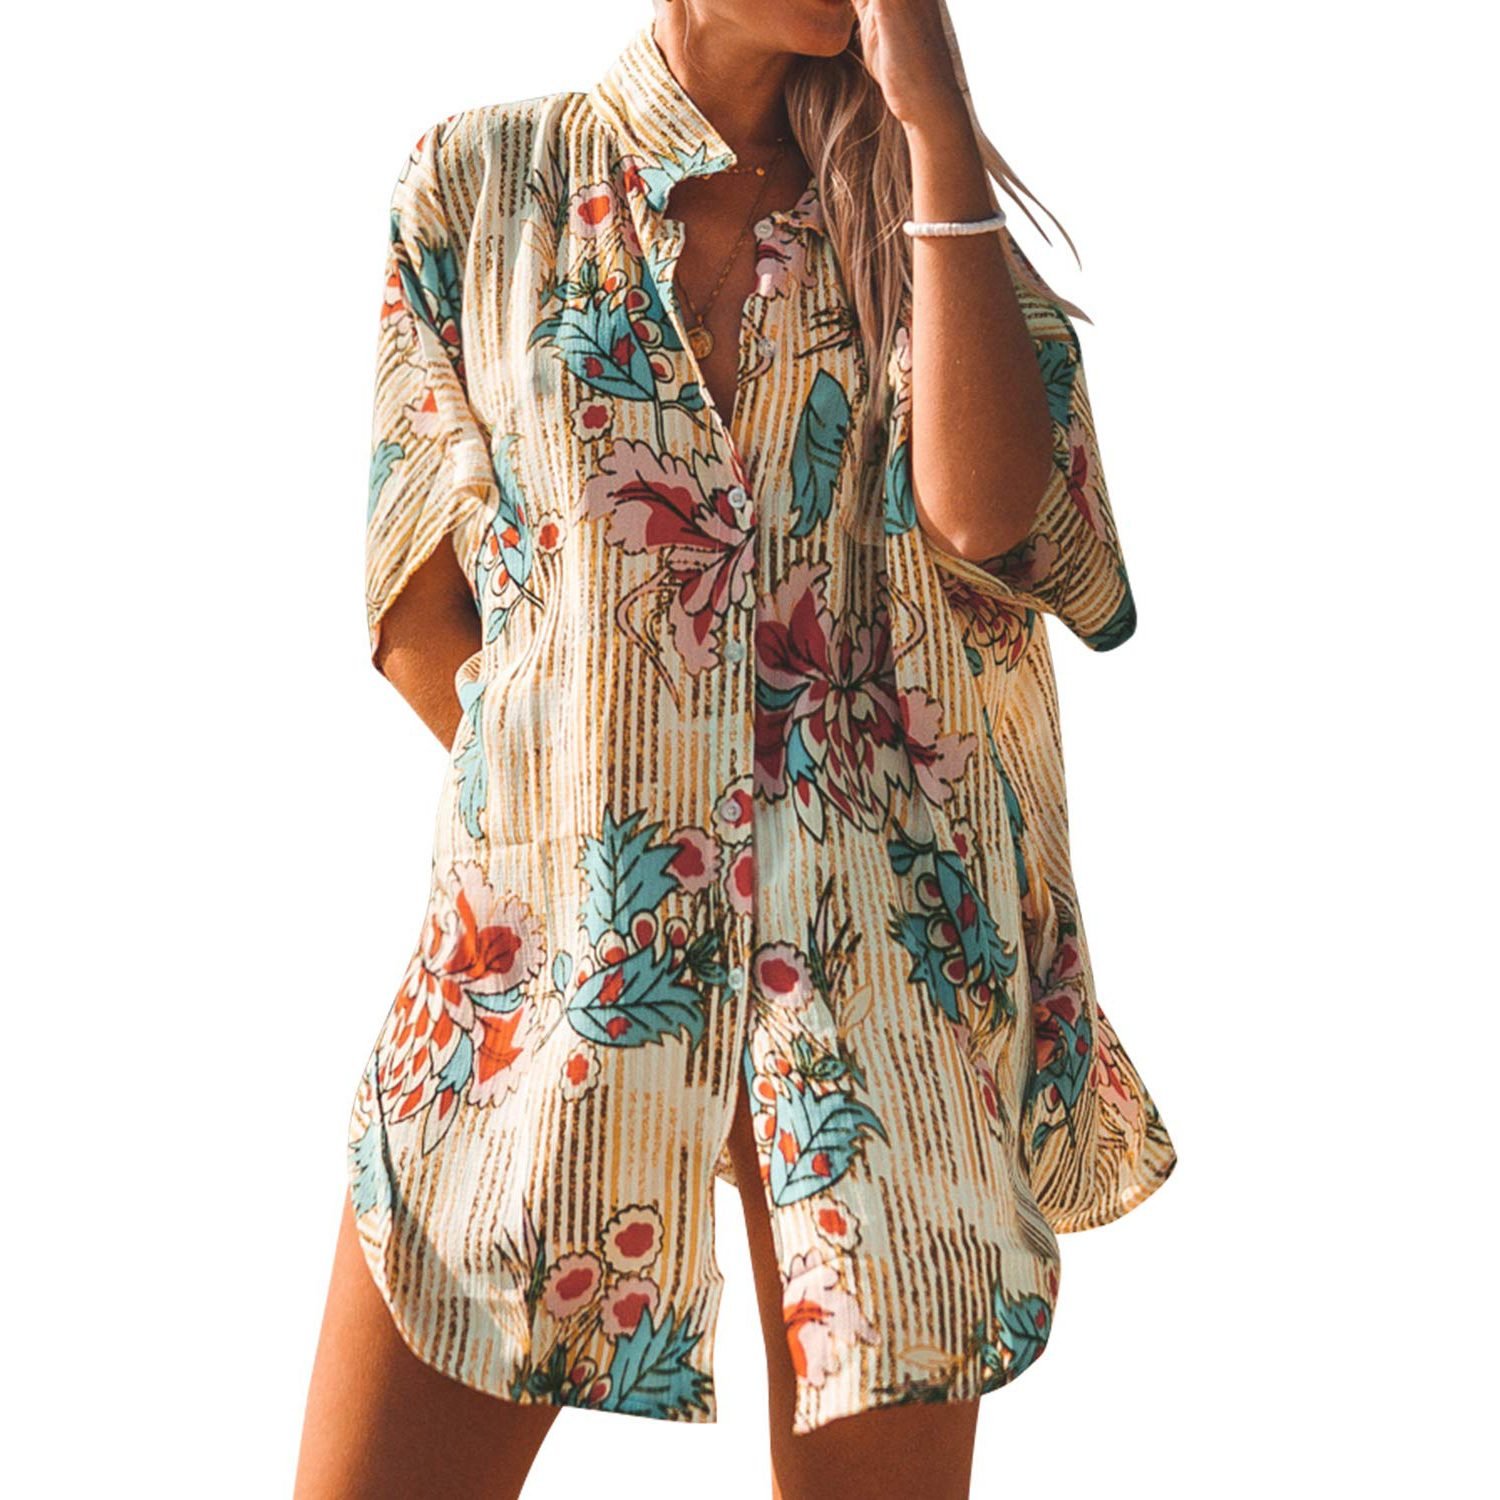 20 Best Bathing Suit Cover-Ups 2021 | Swim Cover-Ups, Beach Cover-Ups